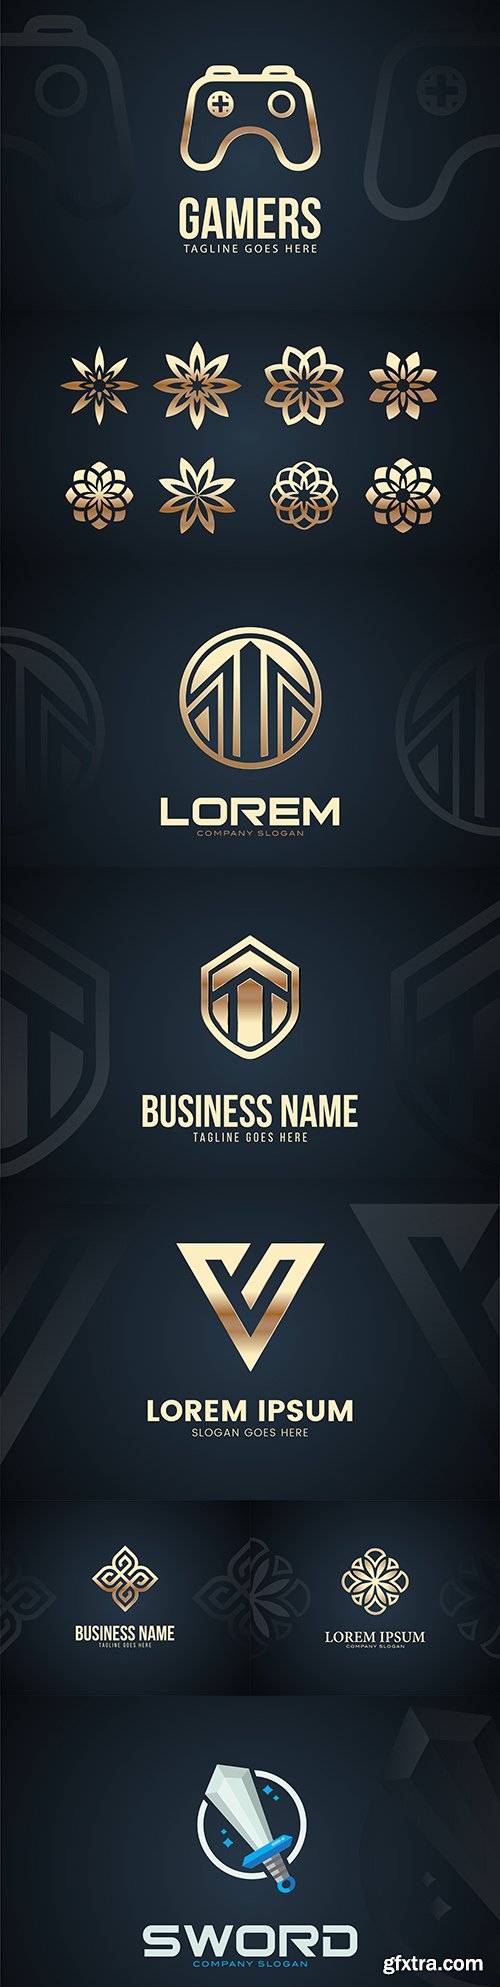 Modern and luxurious design template logo gold color